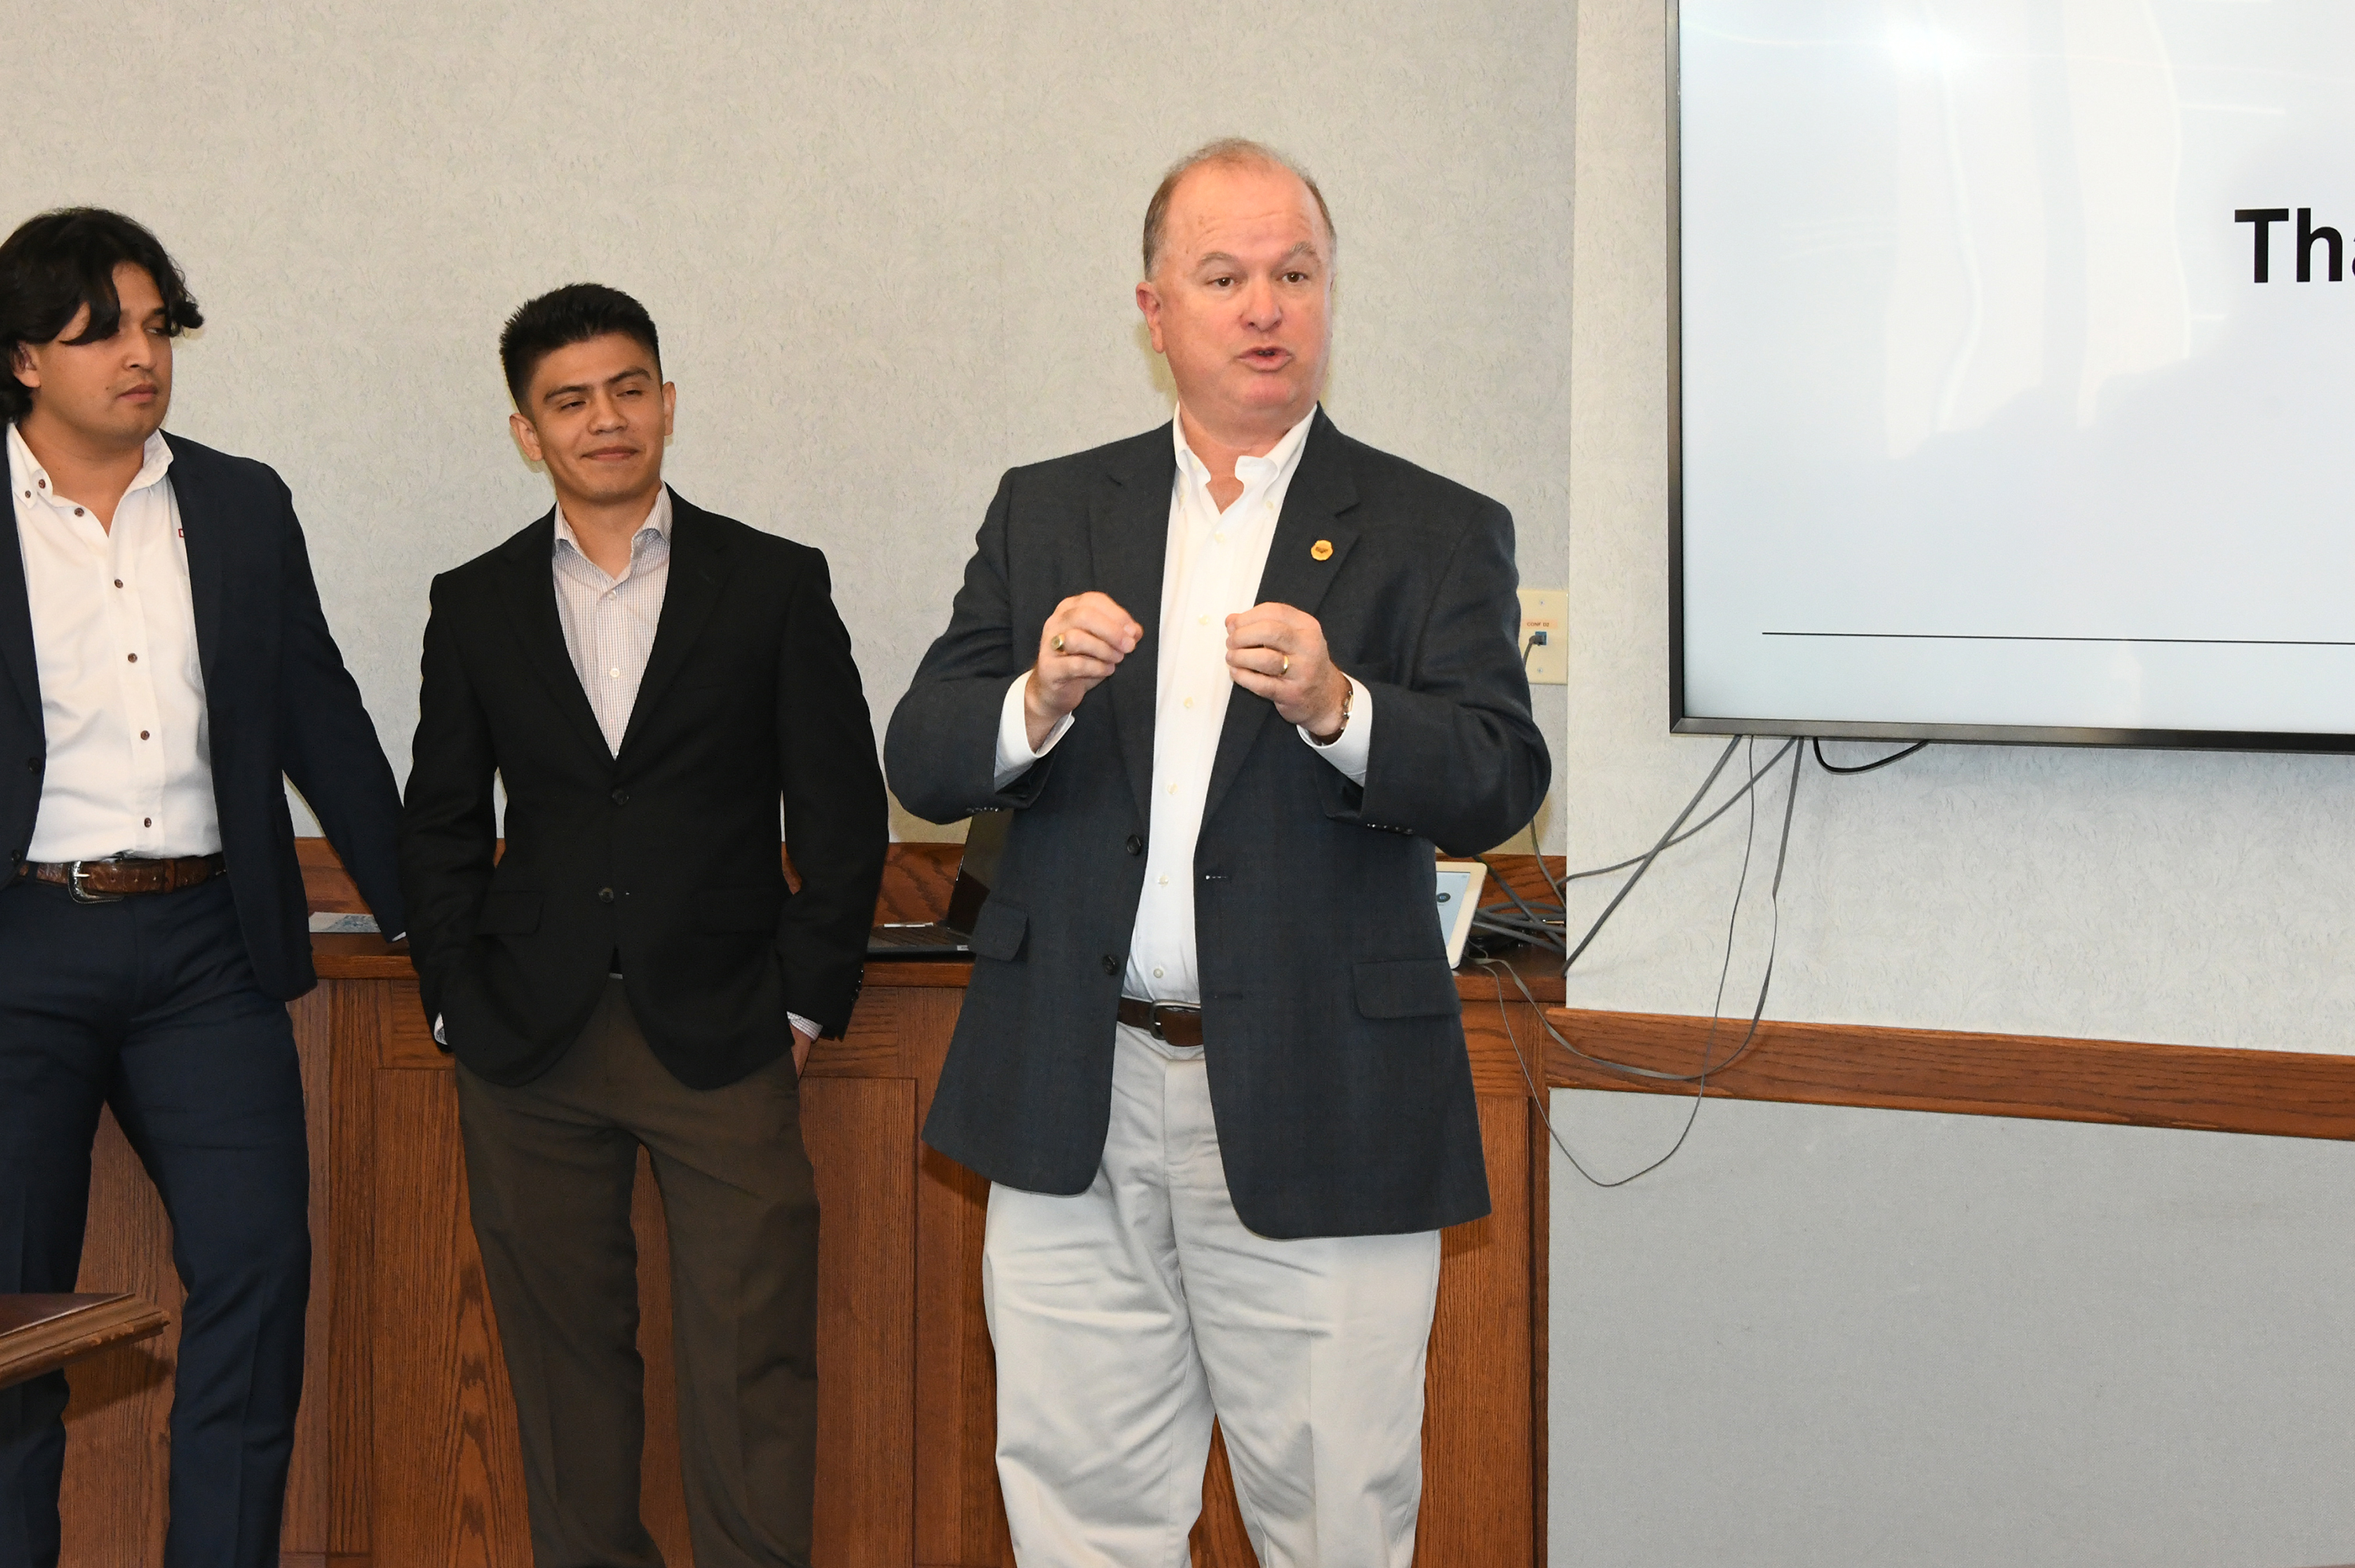 Tom Gayner shares his stock market expertise during an Oct. 11 gathering of the COB Investment Club.